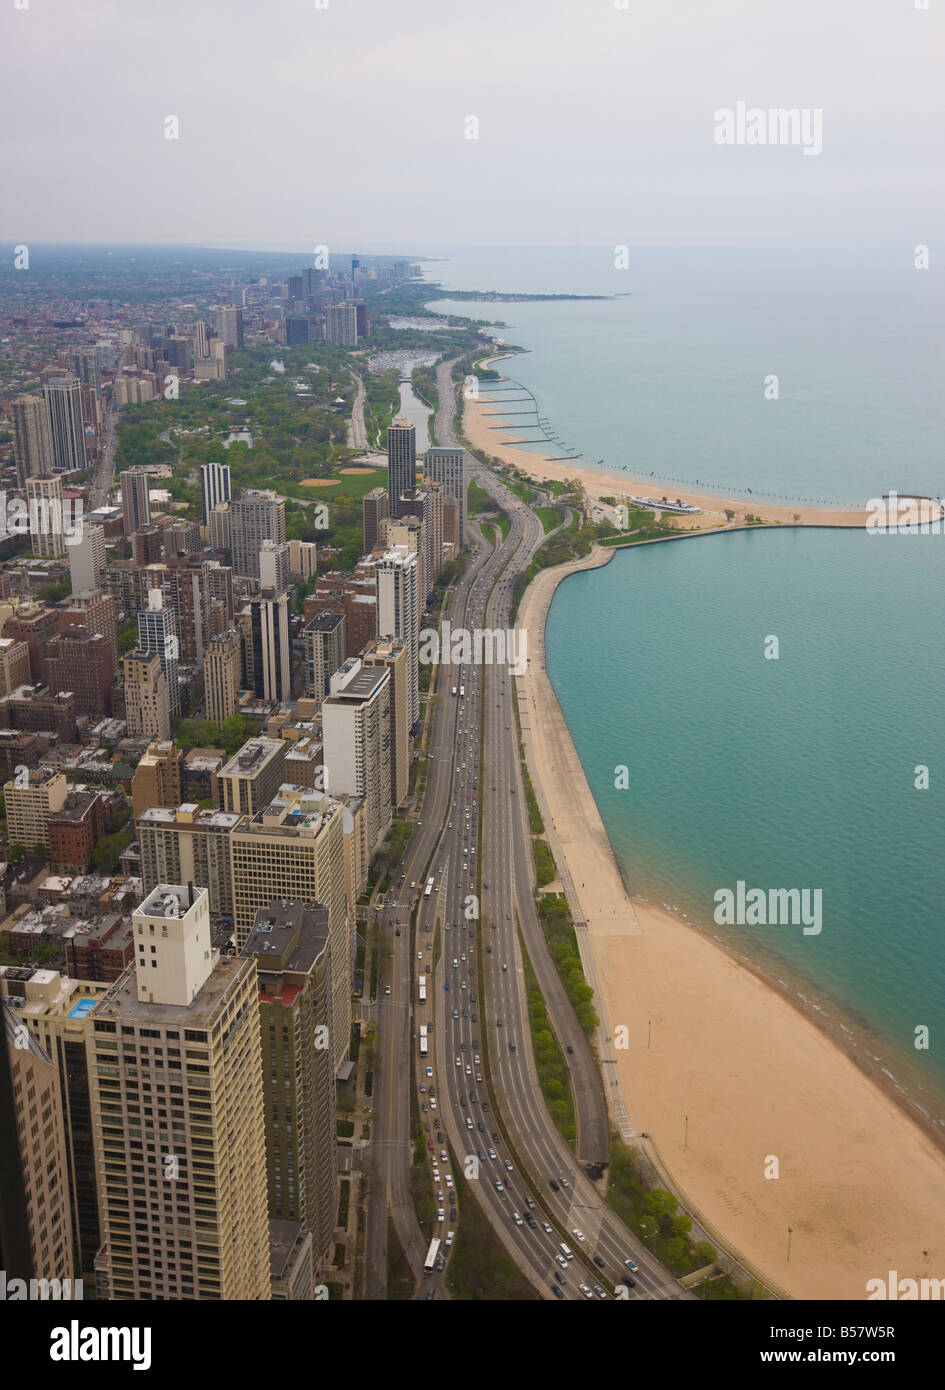 Aerial view looking north up Lakeshore Drive to the Gold Coast district, Chicago, Illinois United States of America Stock Photo